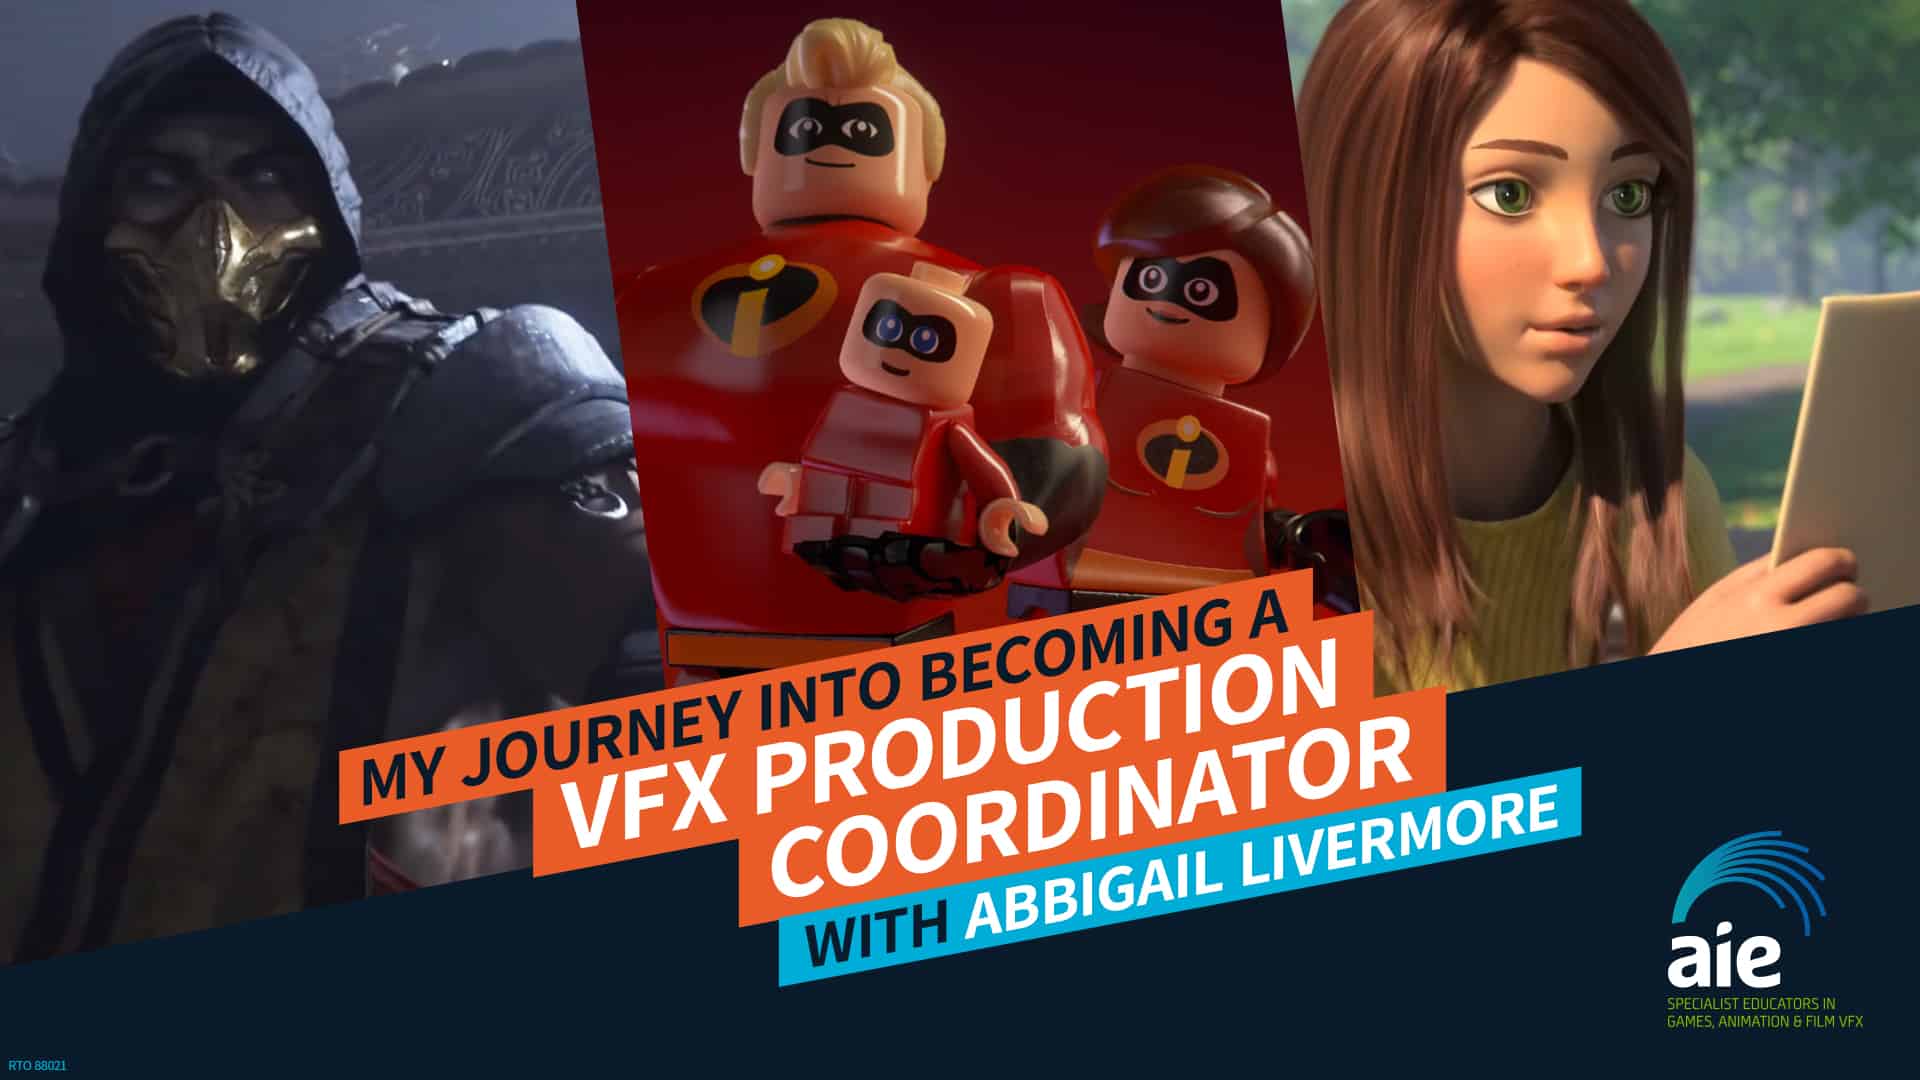 My Journey into becoming a VFX Production Coordinator - Abbigail Livermore image | AIE Workshop